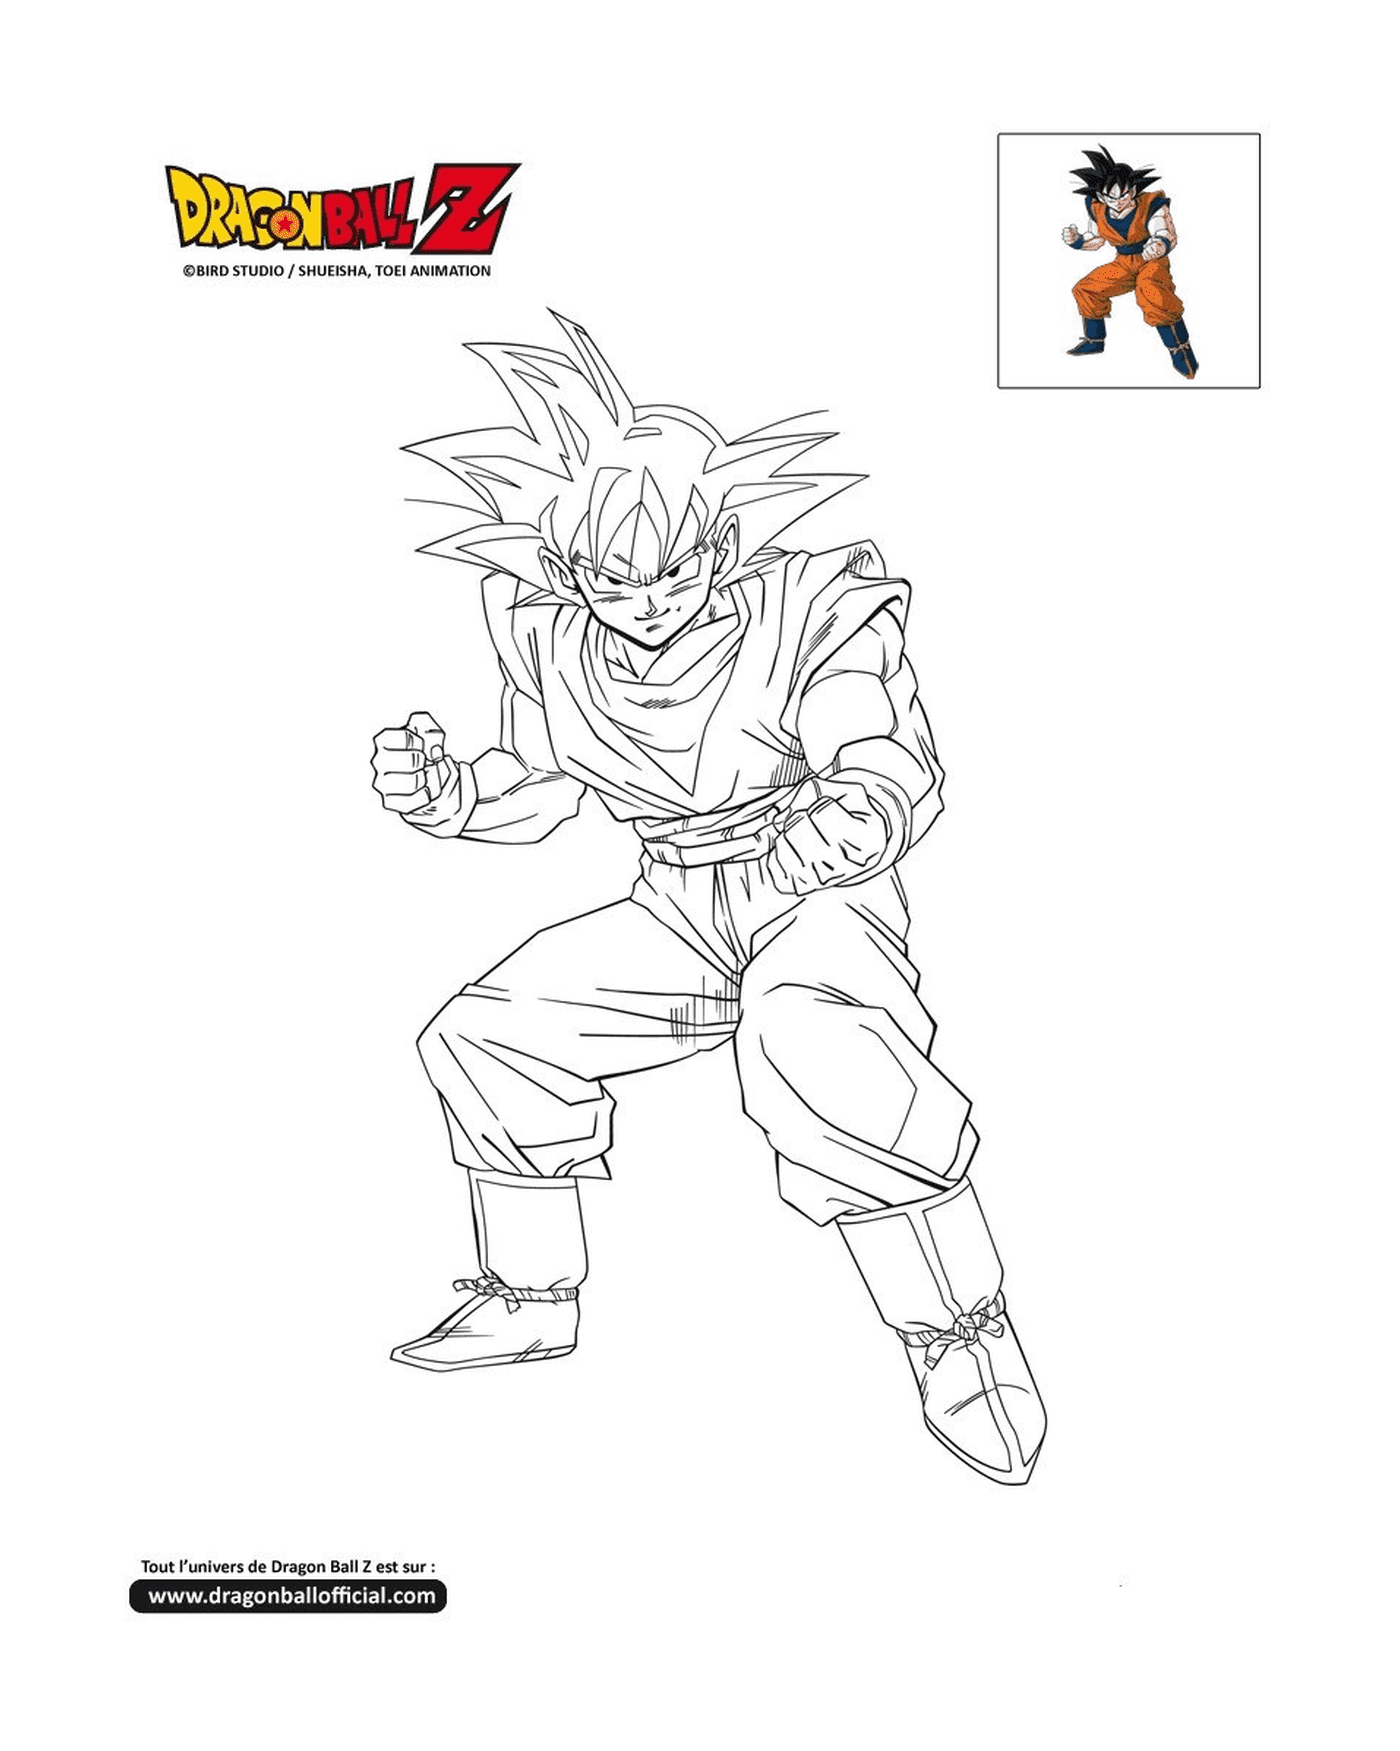  Goku pronto a combattere in Dragon Ball Z 